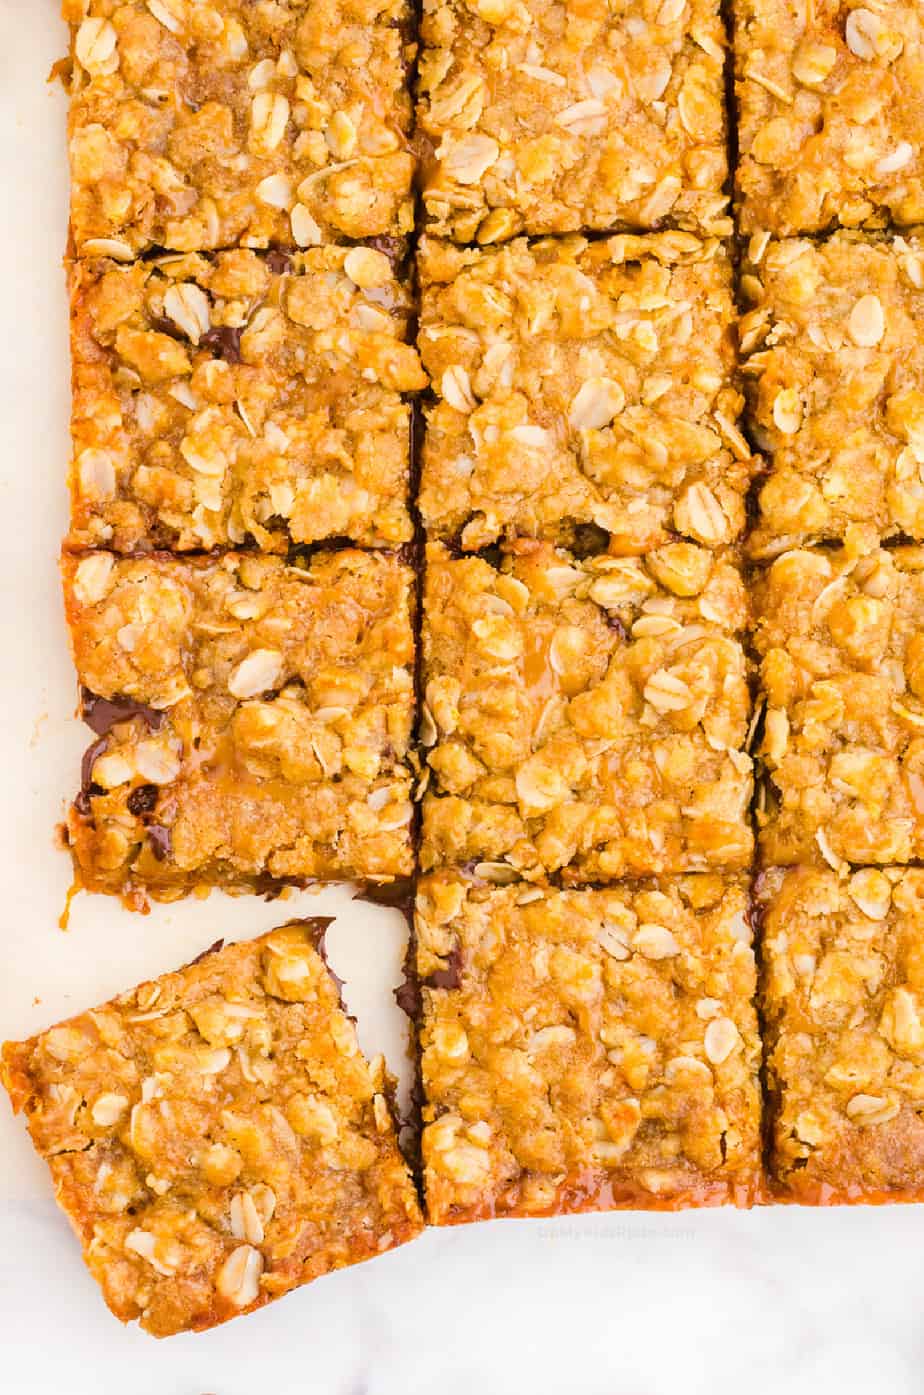 Carmelita bars that have been baked and sliced